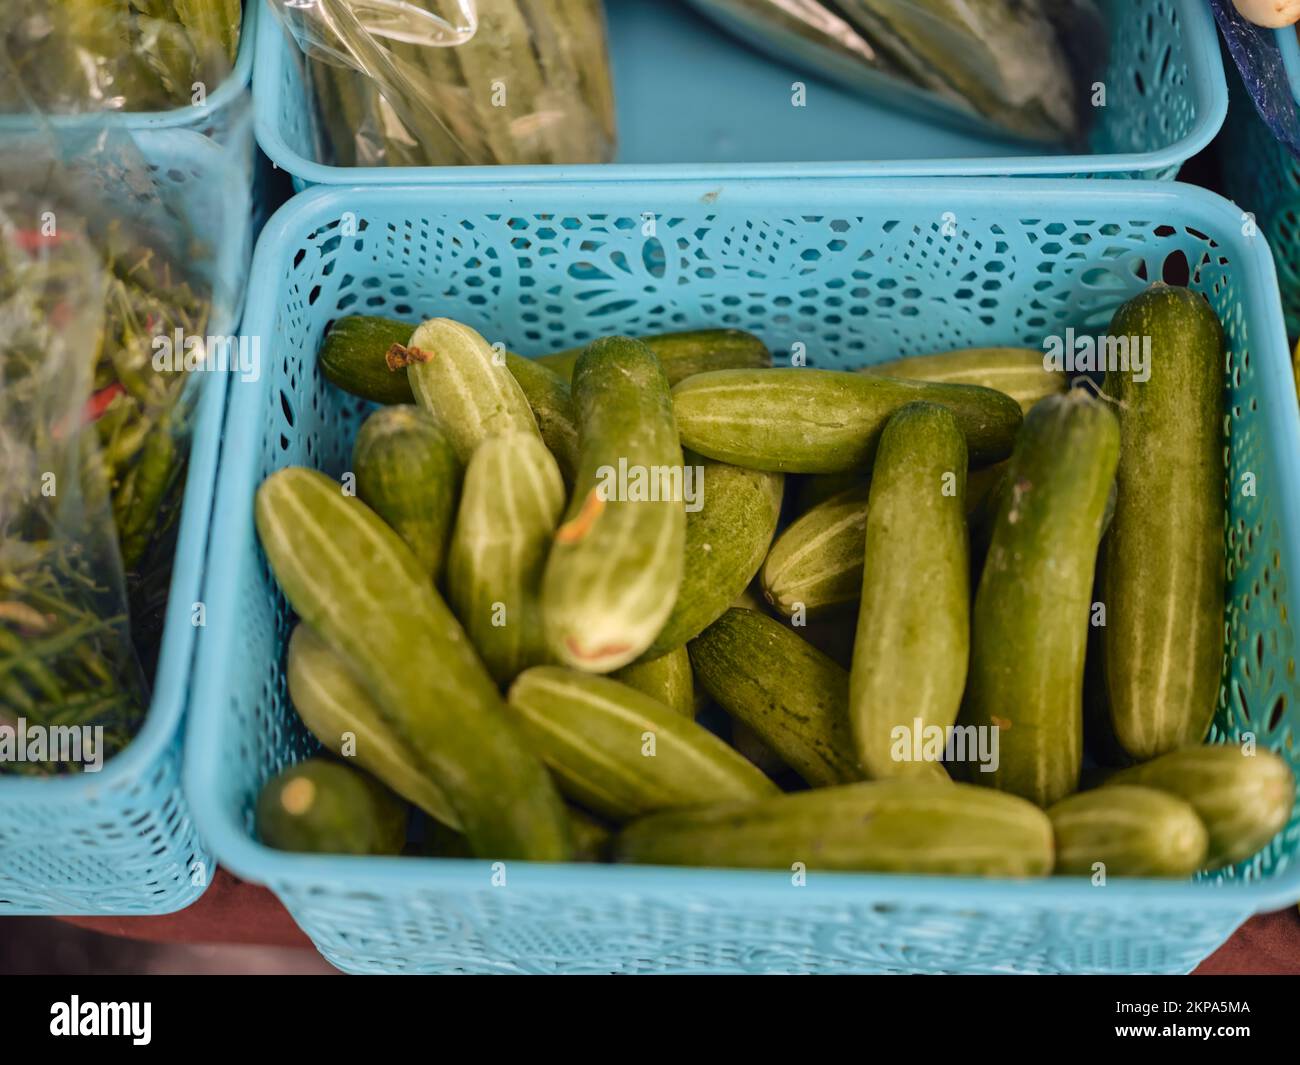 THAI market with various colorful fresh vegetables Stock Photo